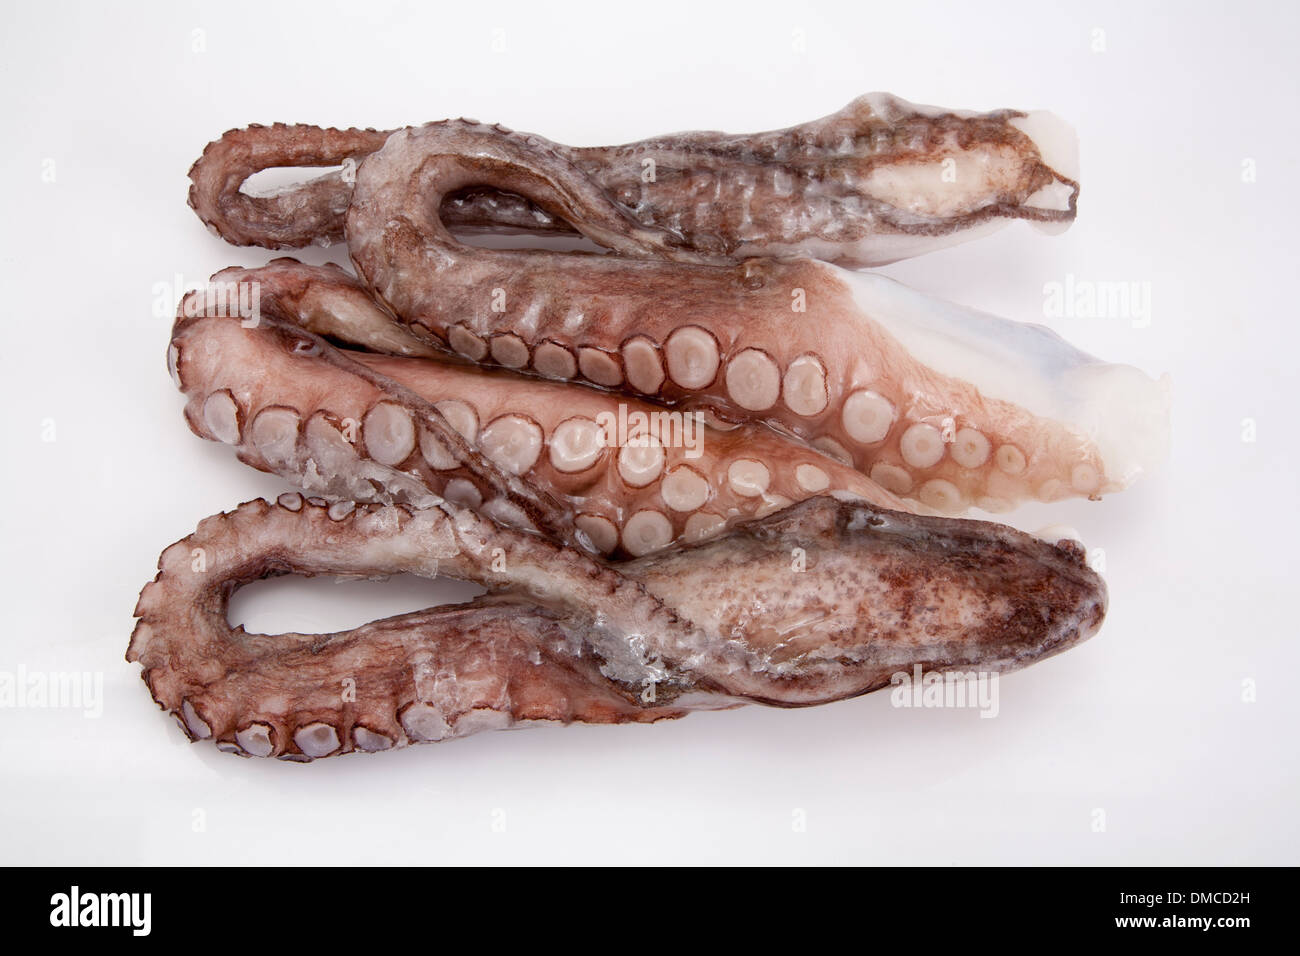 Octopus seafood frozen freeze raw uncooked food nutrition sea creature commerce buy sell wholesale package quantity many number Stock Photo